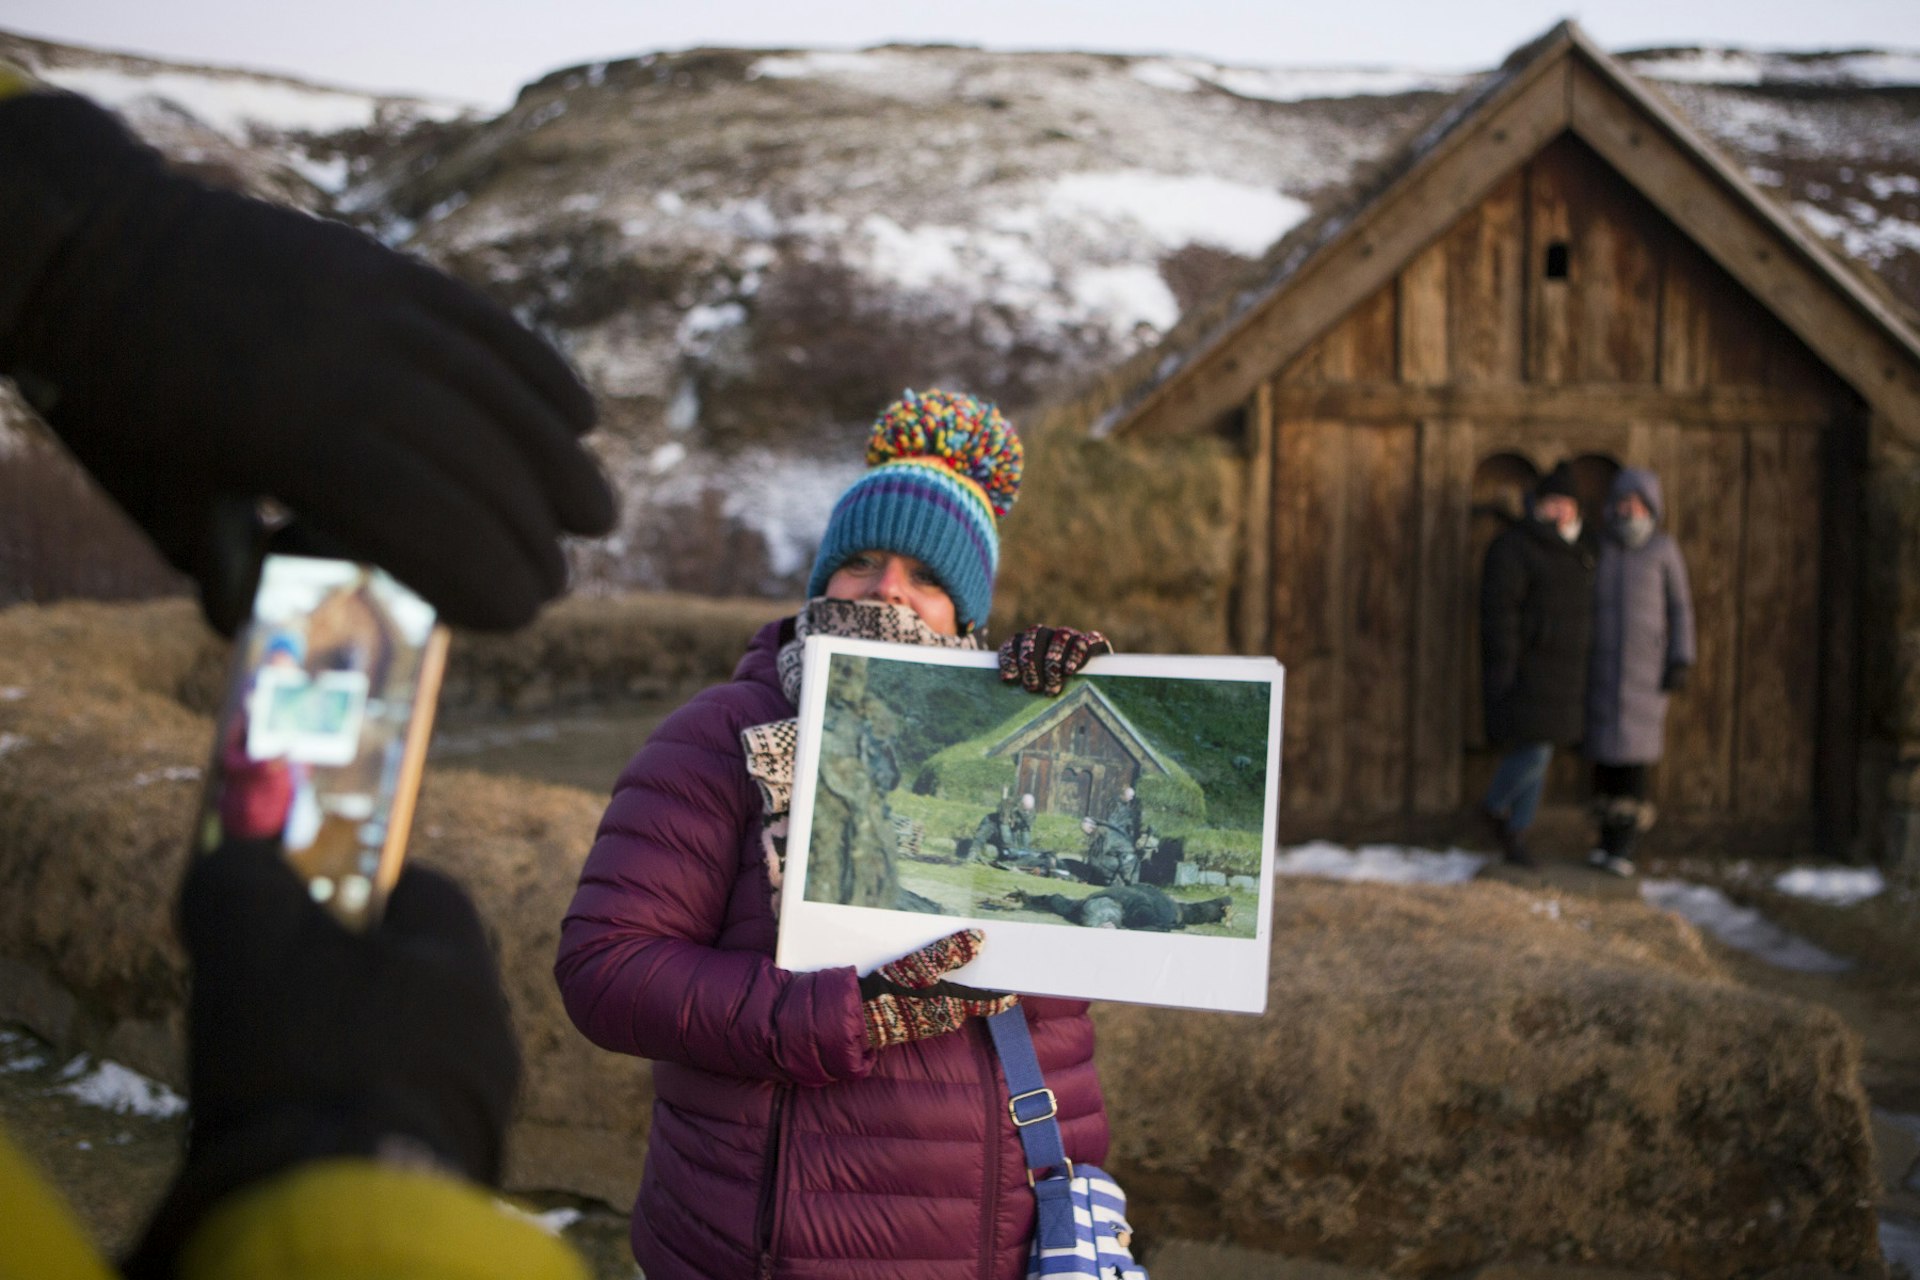 A visitor has their photo take in front of a Game of Thrones location in southern Iceland